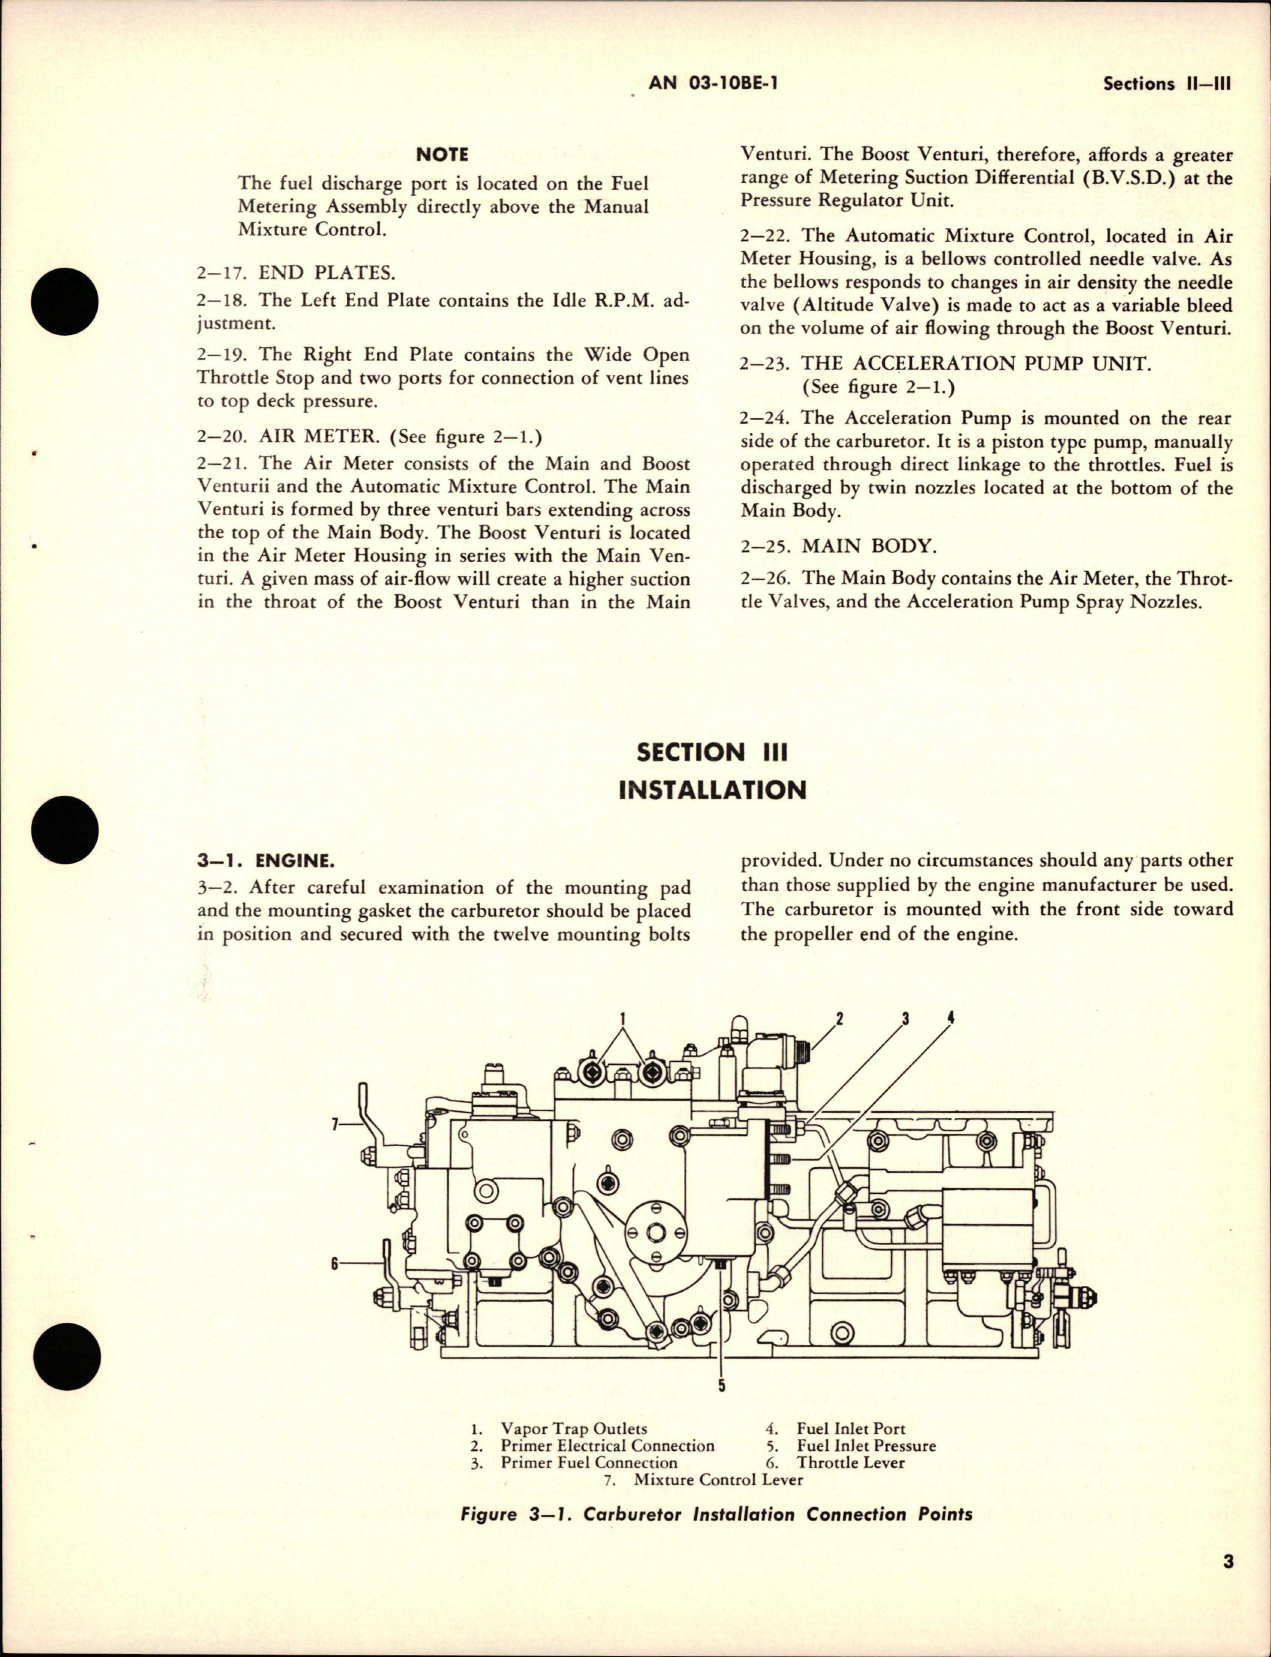 Sample page 9 from AirCorps Library document: Operation, Service, Overhaul Instructions with Parts Catalog for Carburetors - Model 100CPB-7 